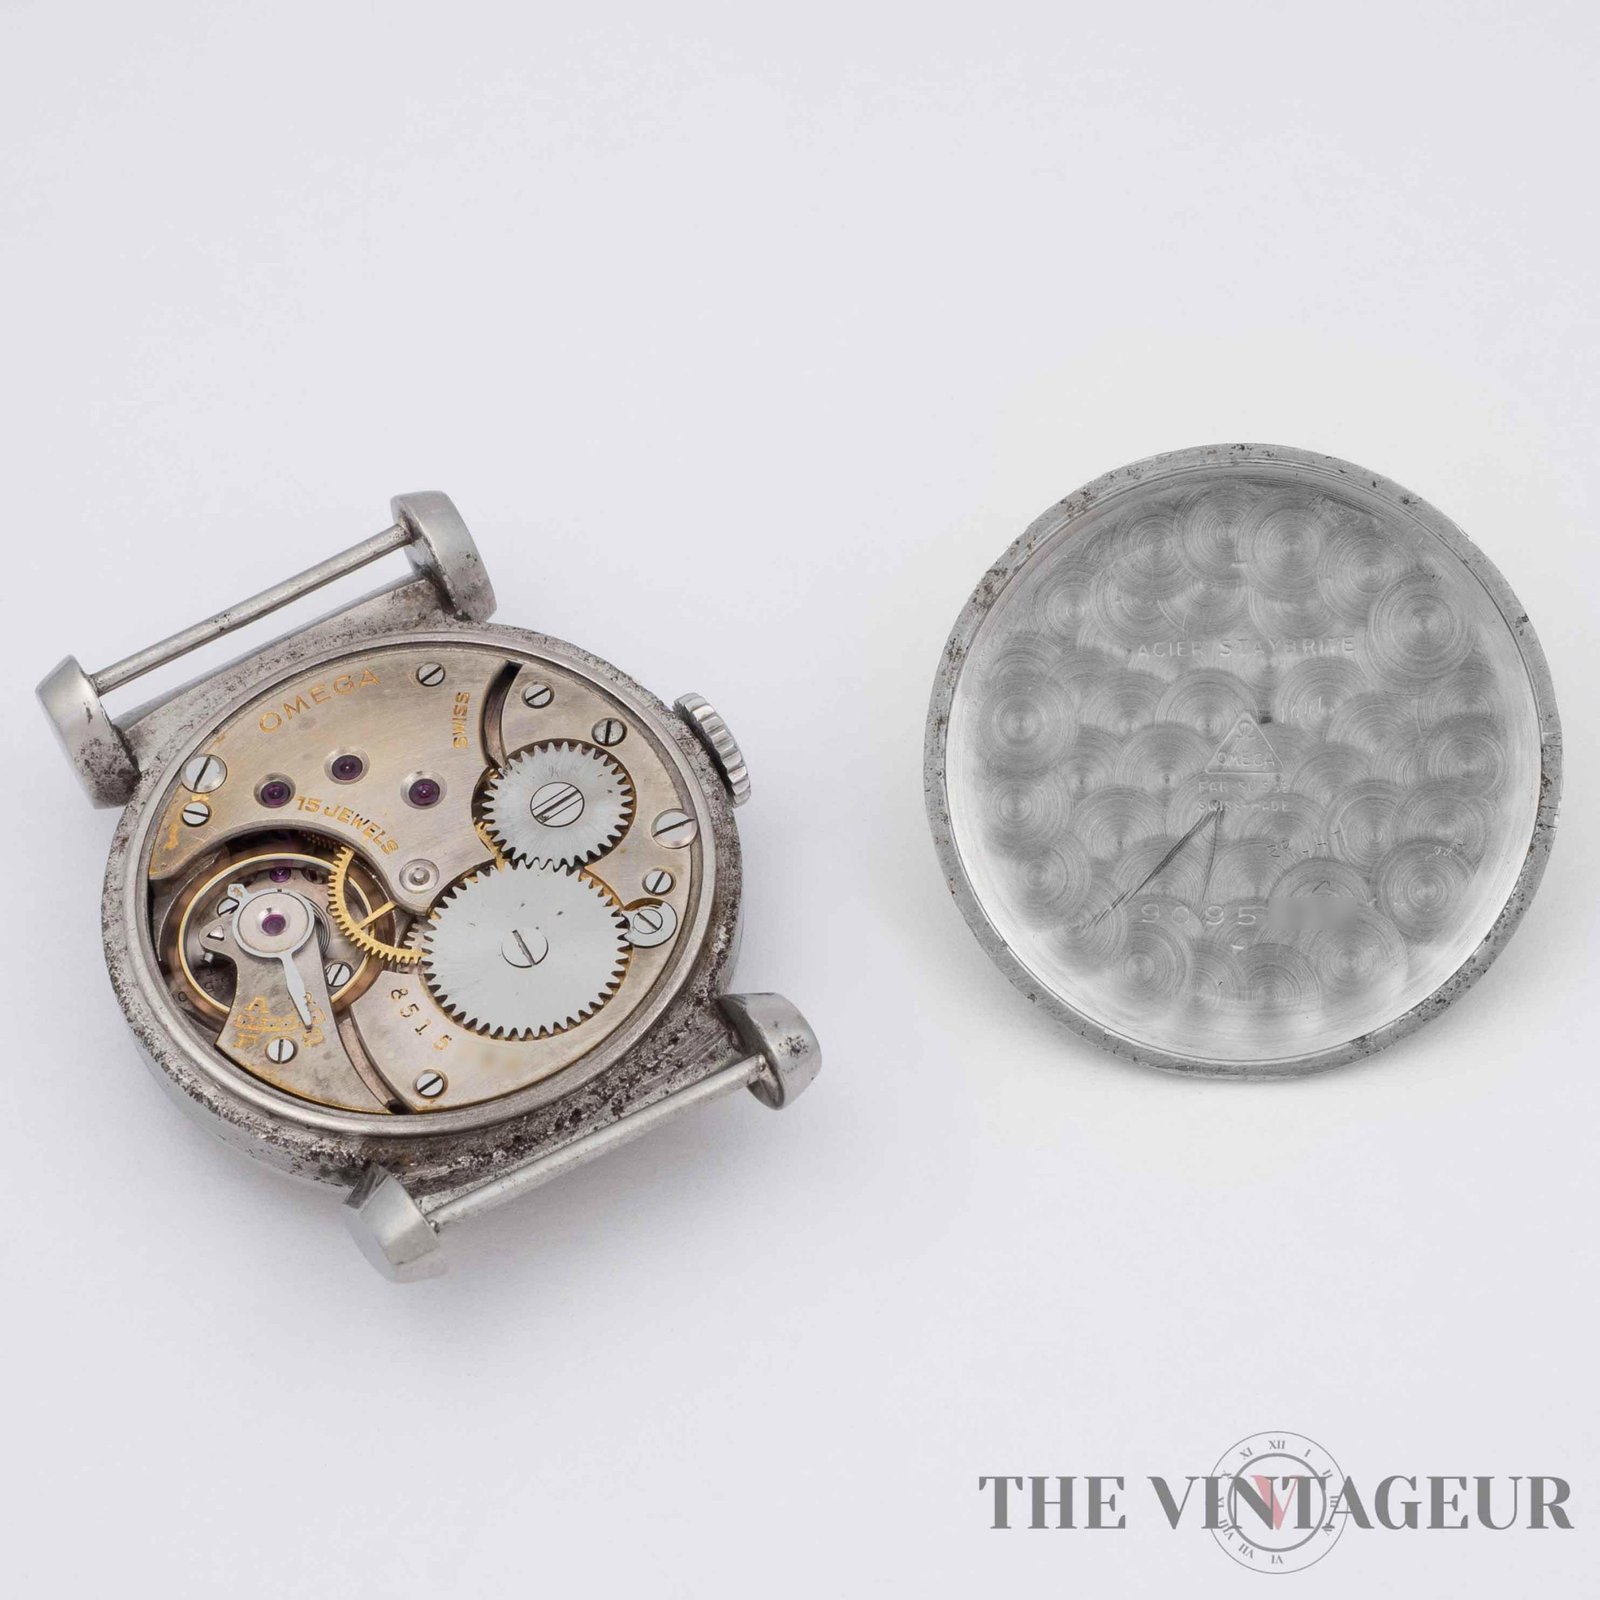 Omega - Scarab - The Vintageur - Your bespoke watches collection - Collectible watches and more